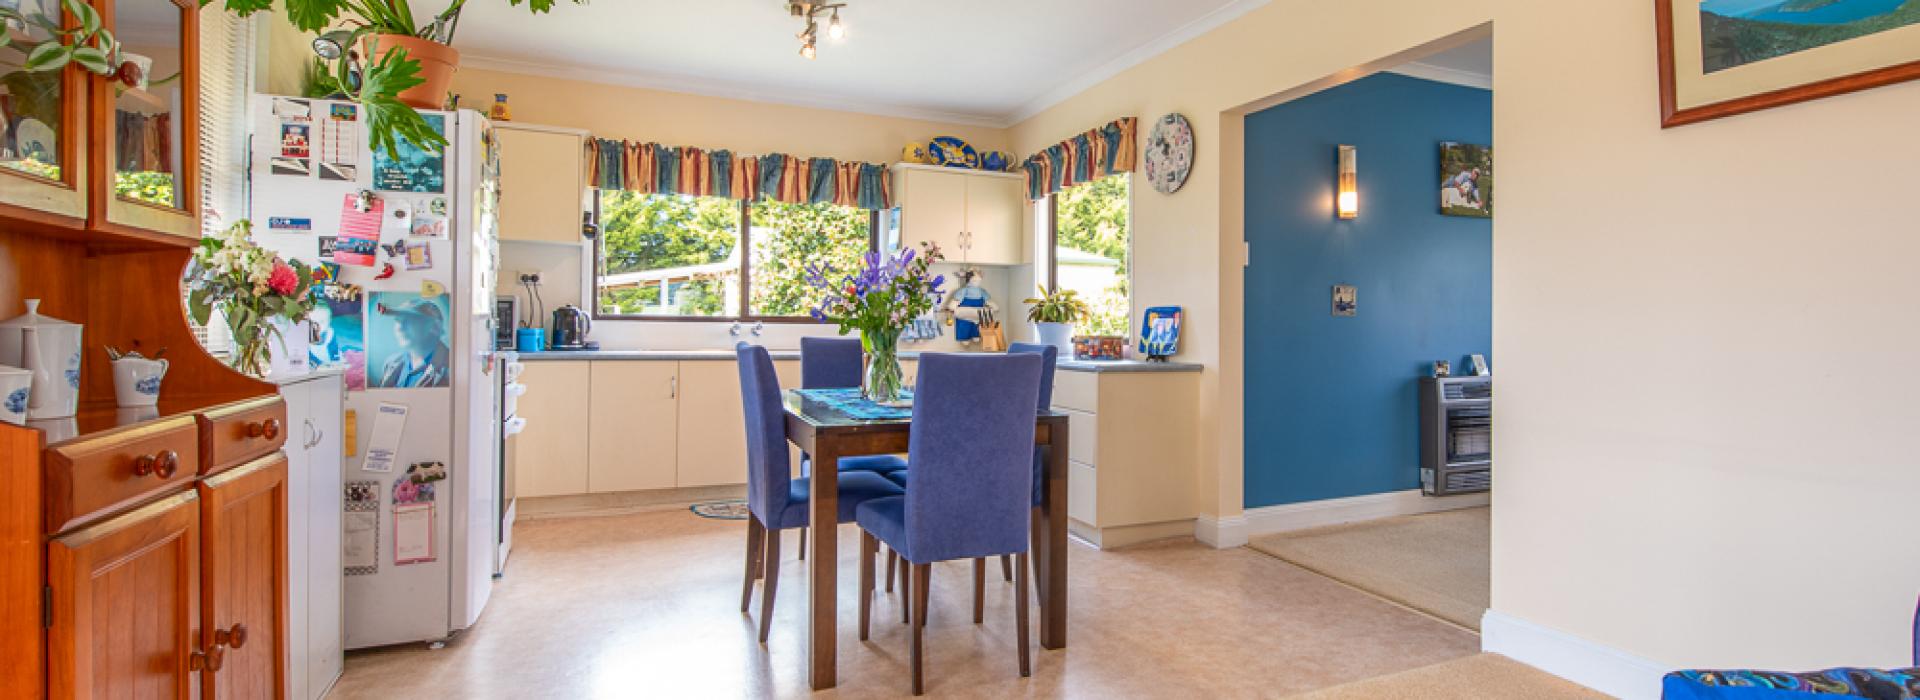 For Sale | Flanagan Residential | Rae Smith | Sidmouth